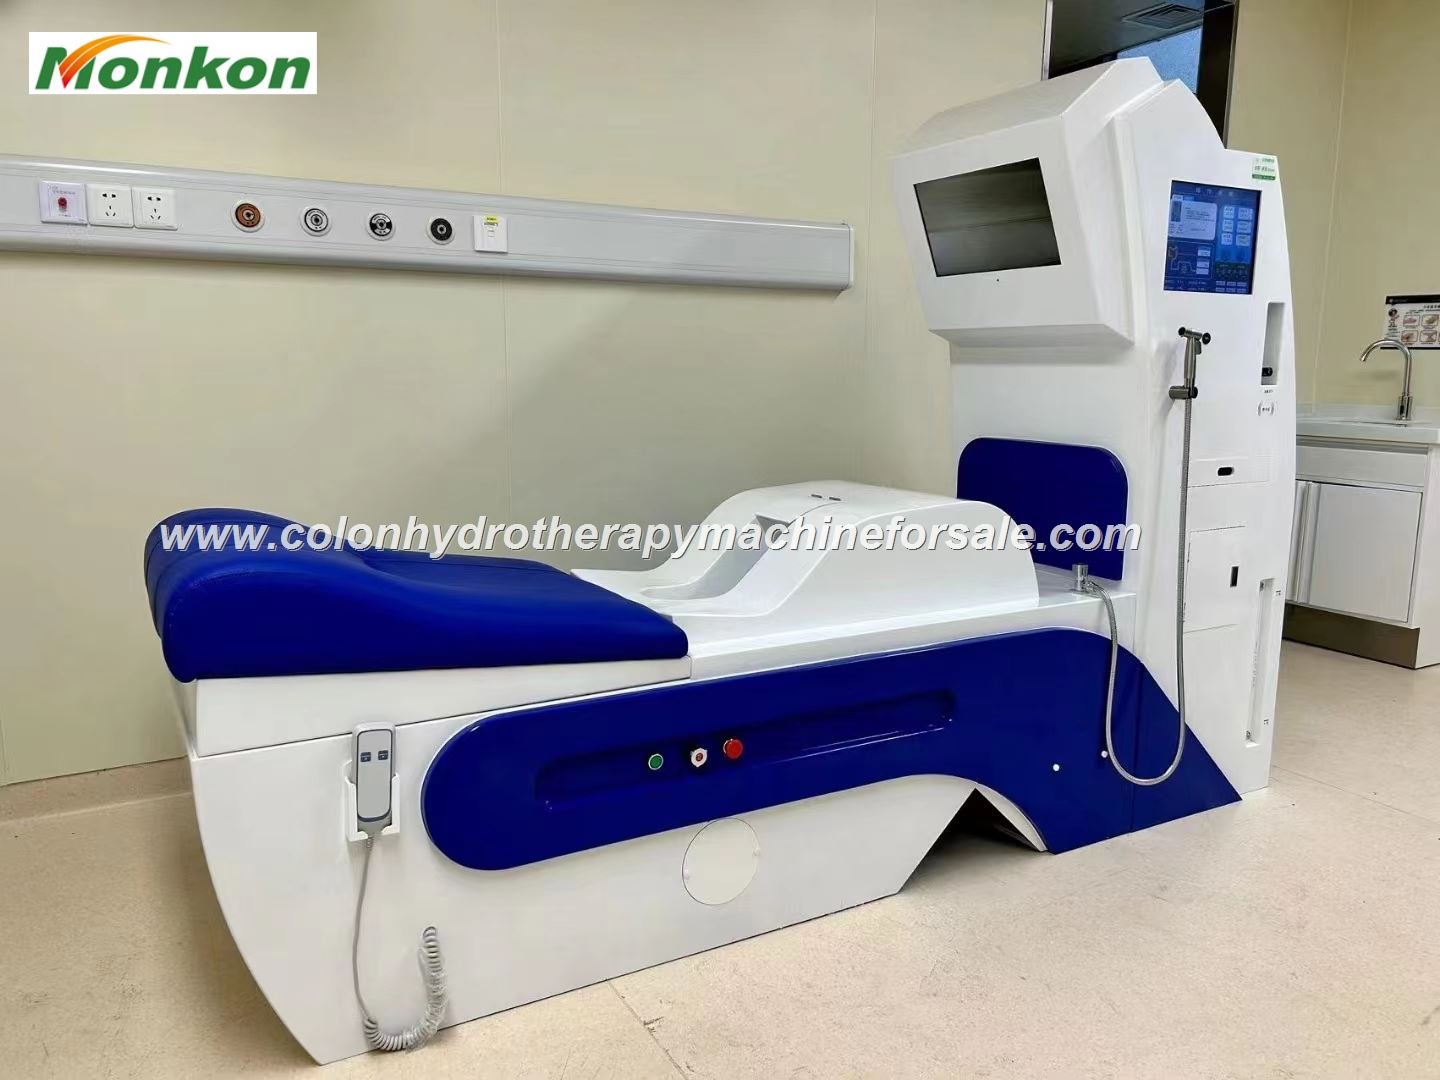 Open System Colon Hydrotherapy for Sale